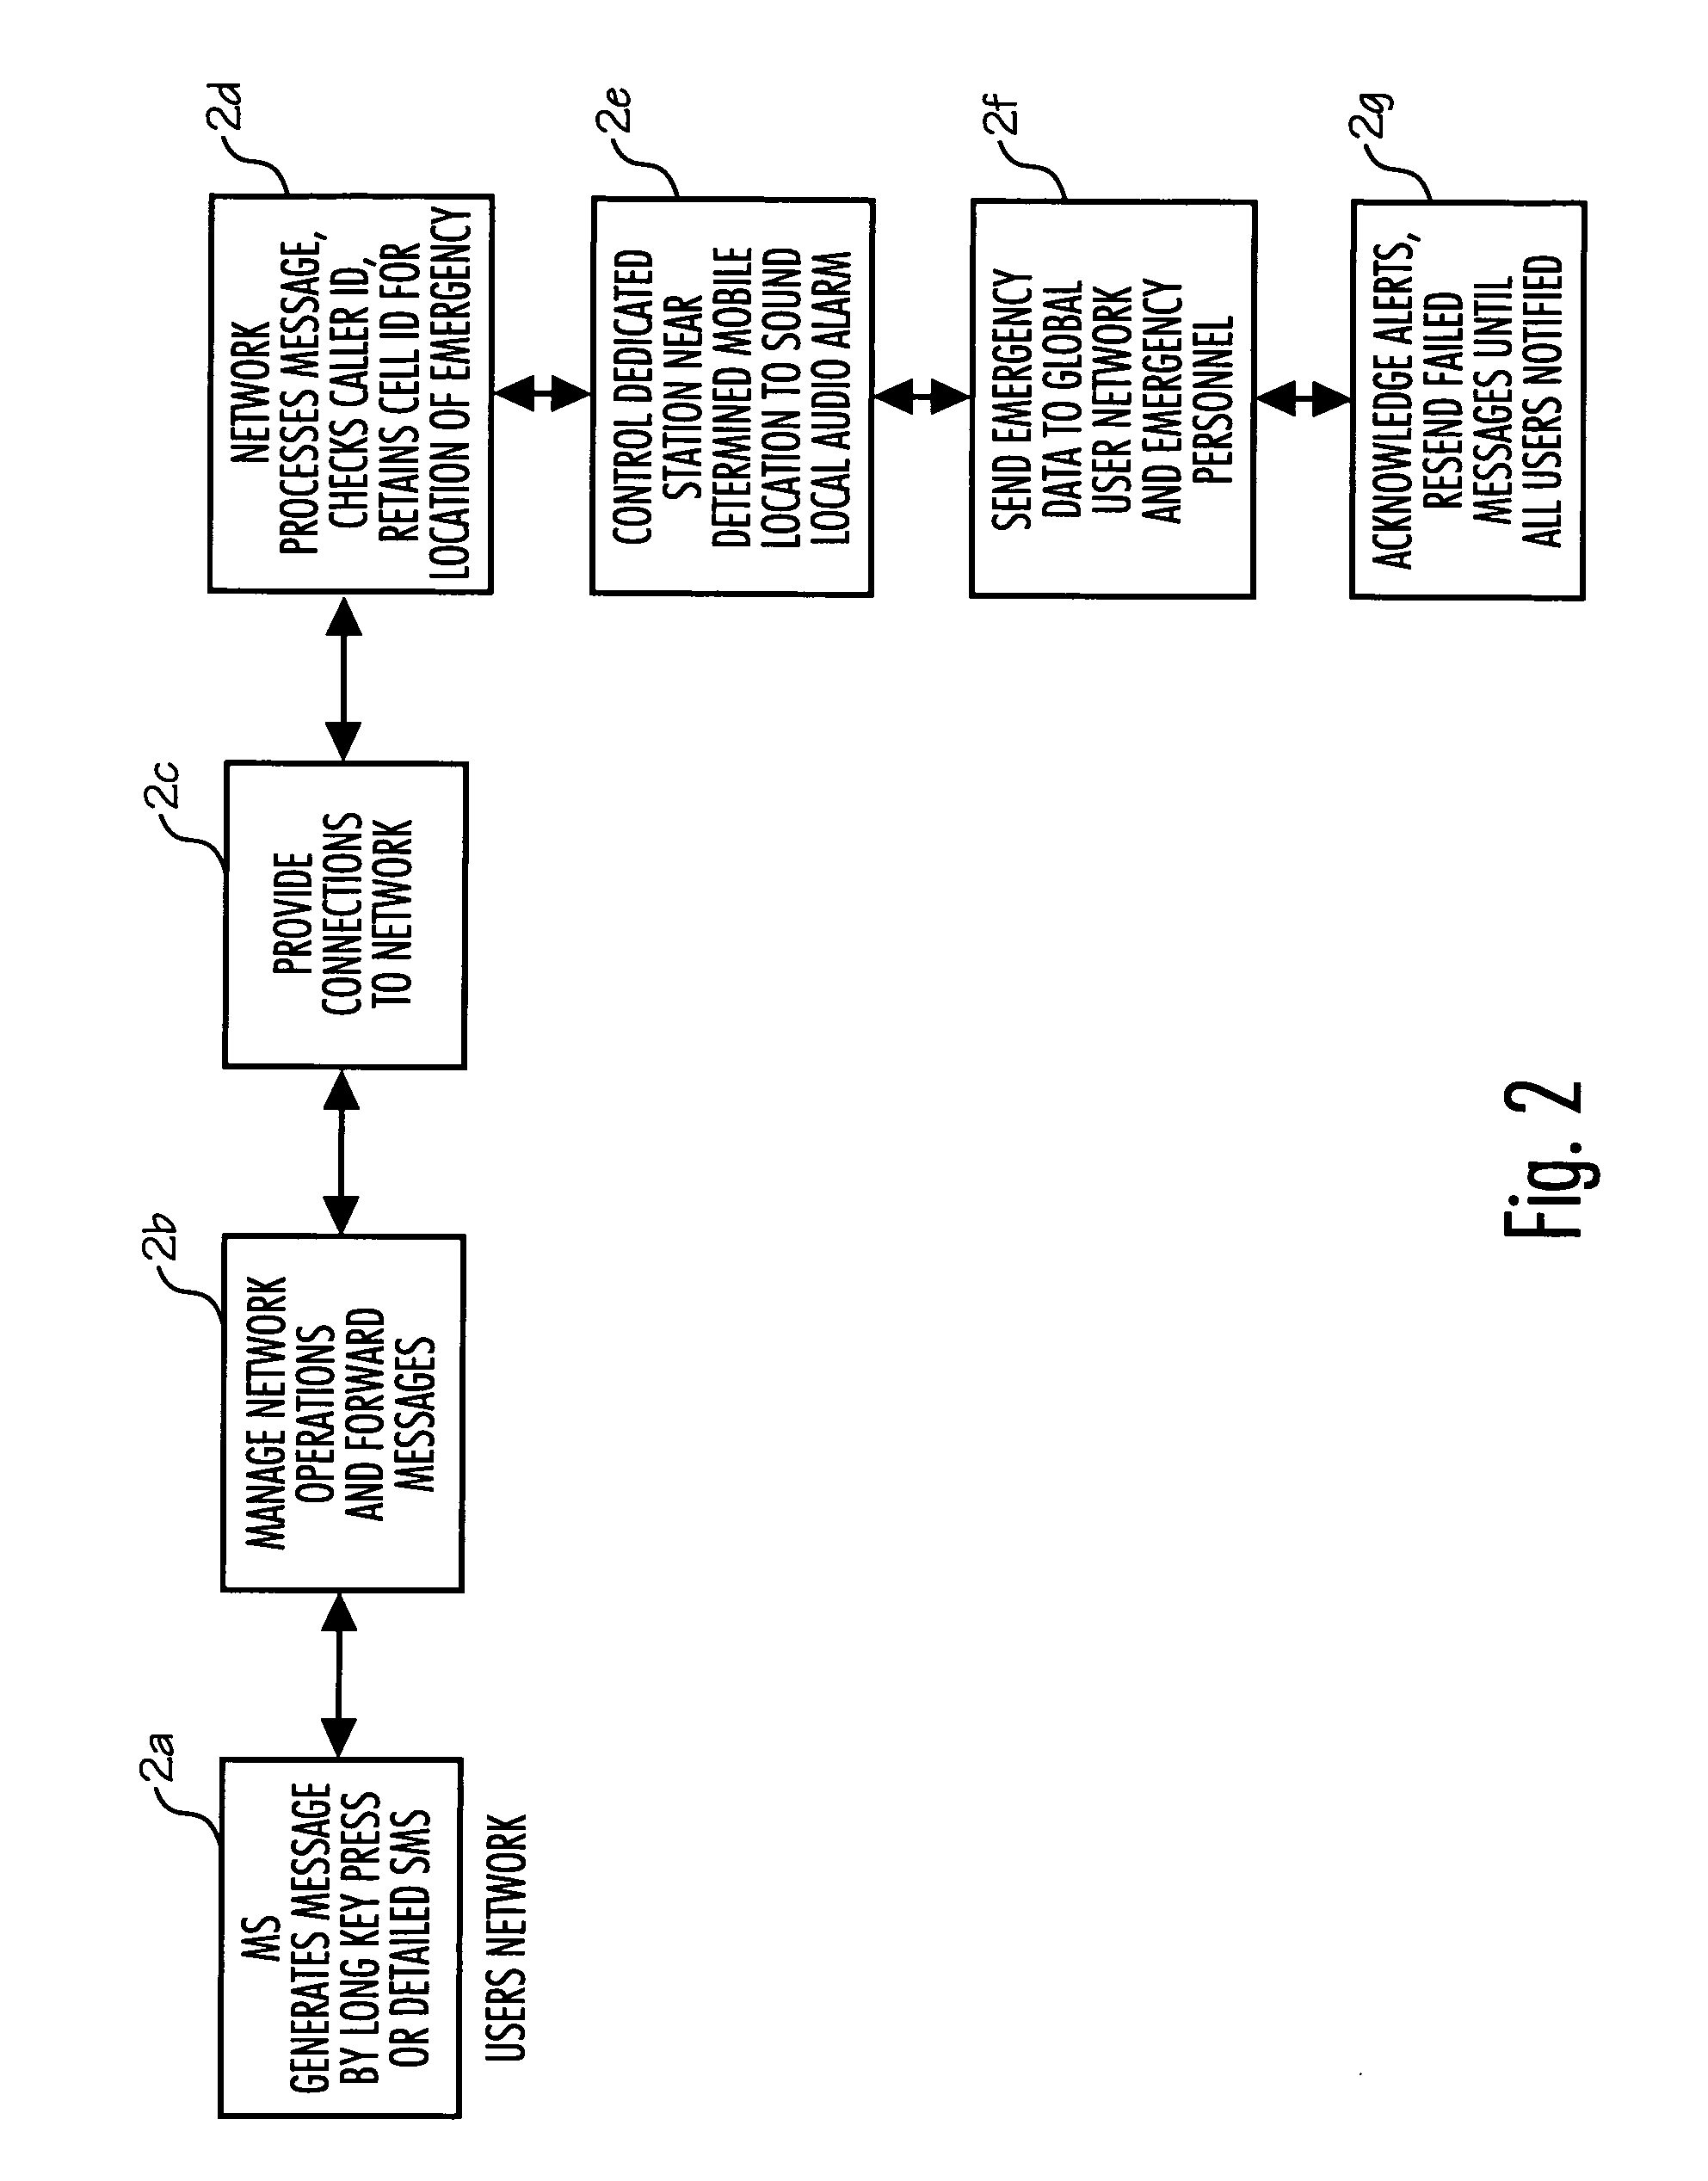 Personal safety mobile notification system, method and apparatus